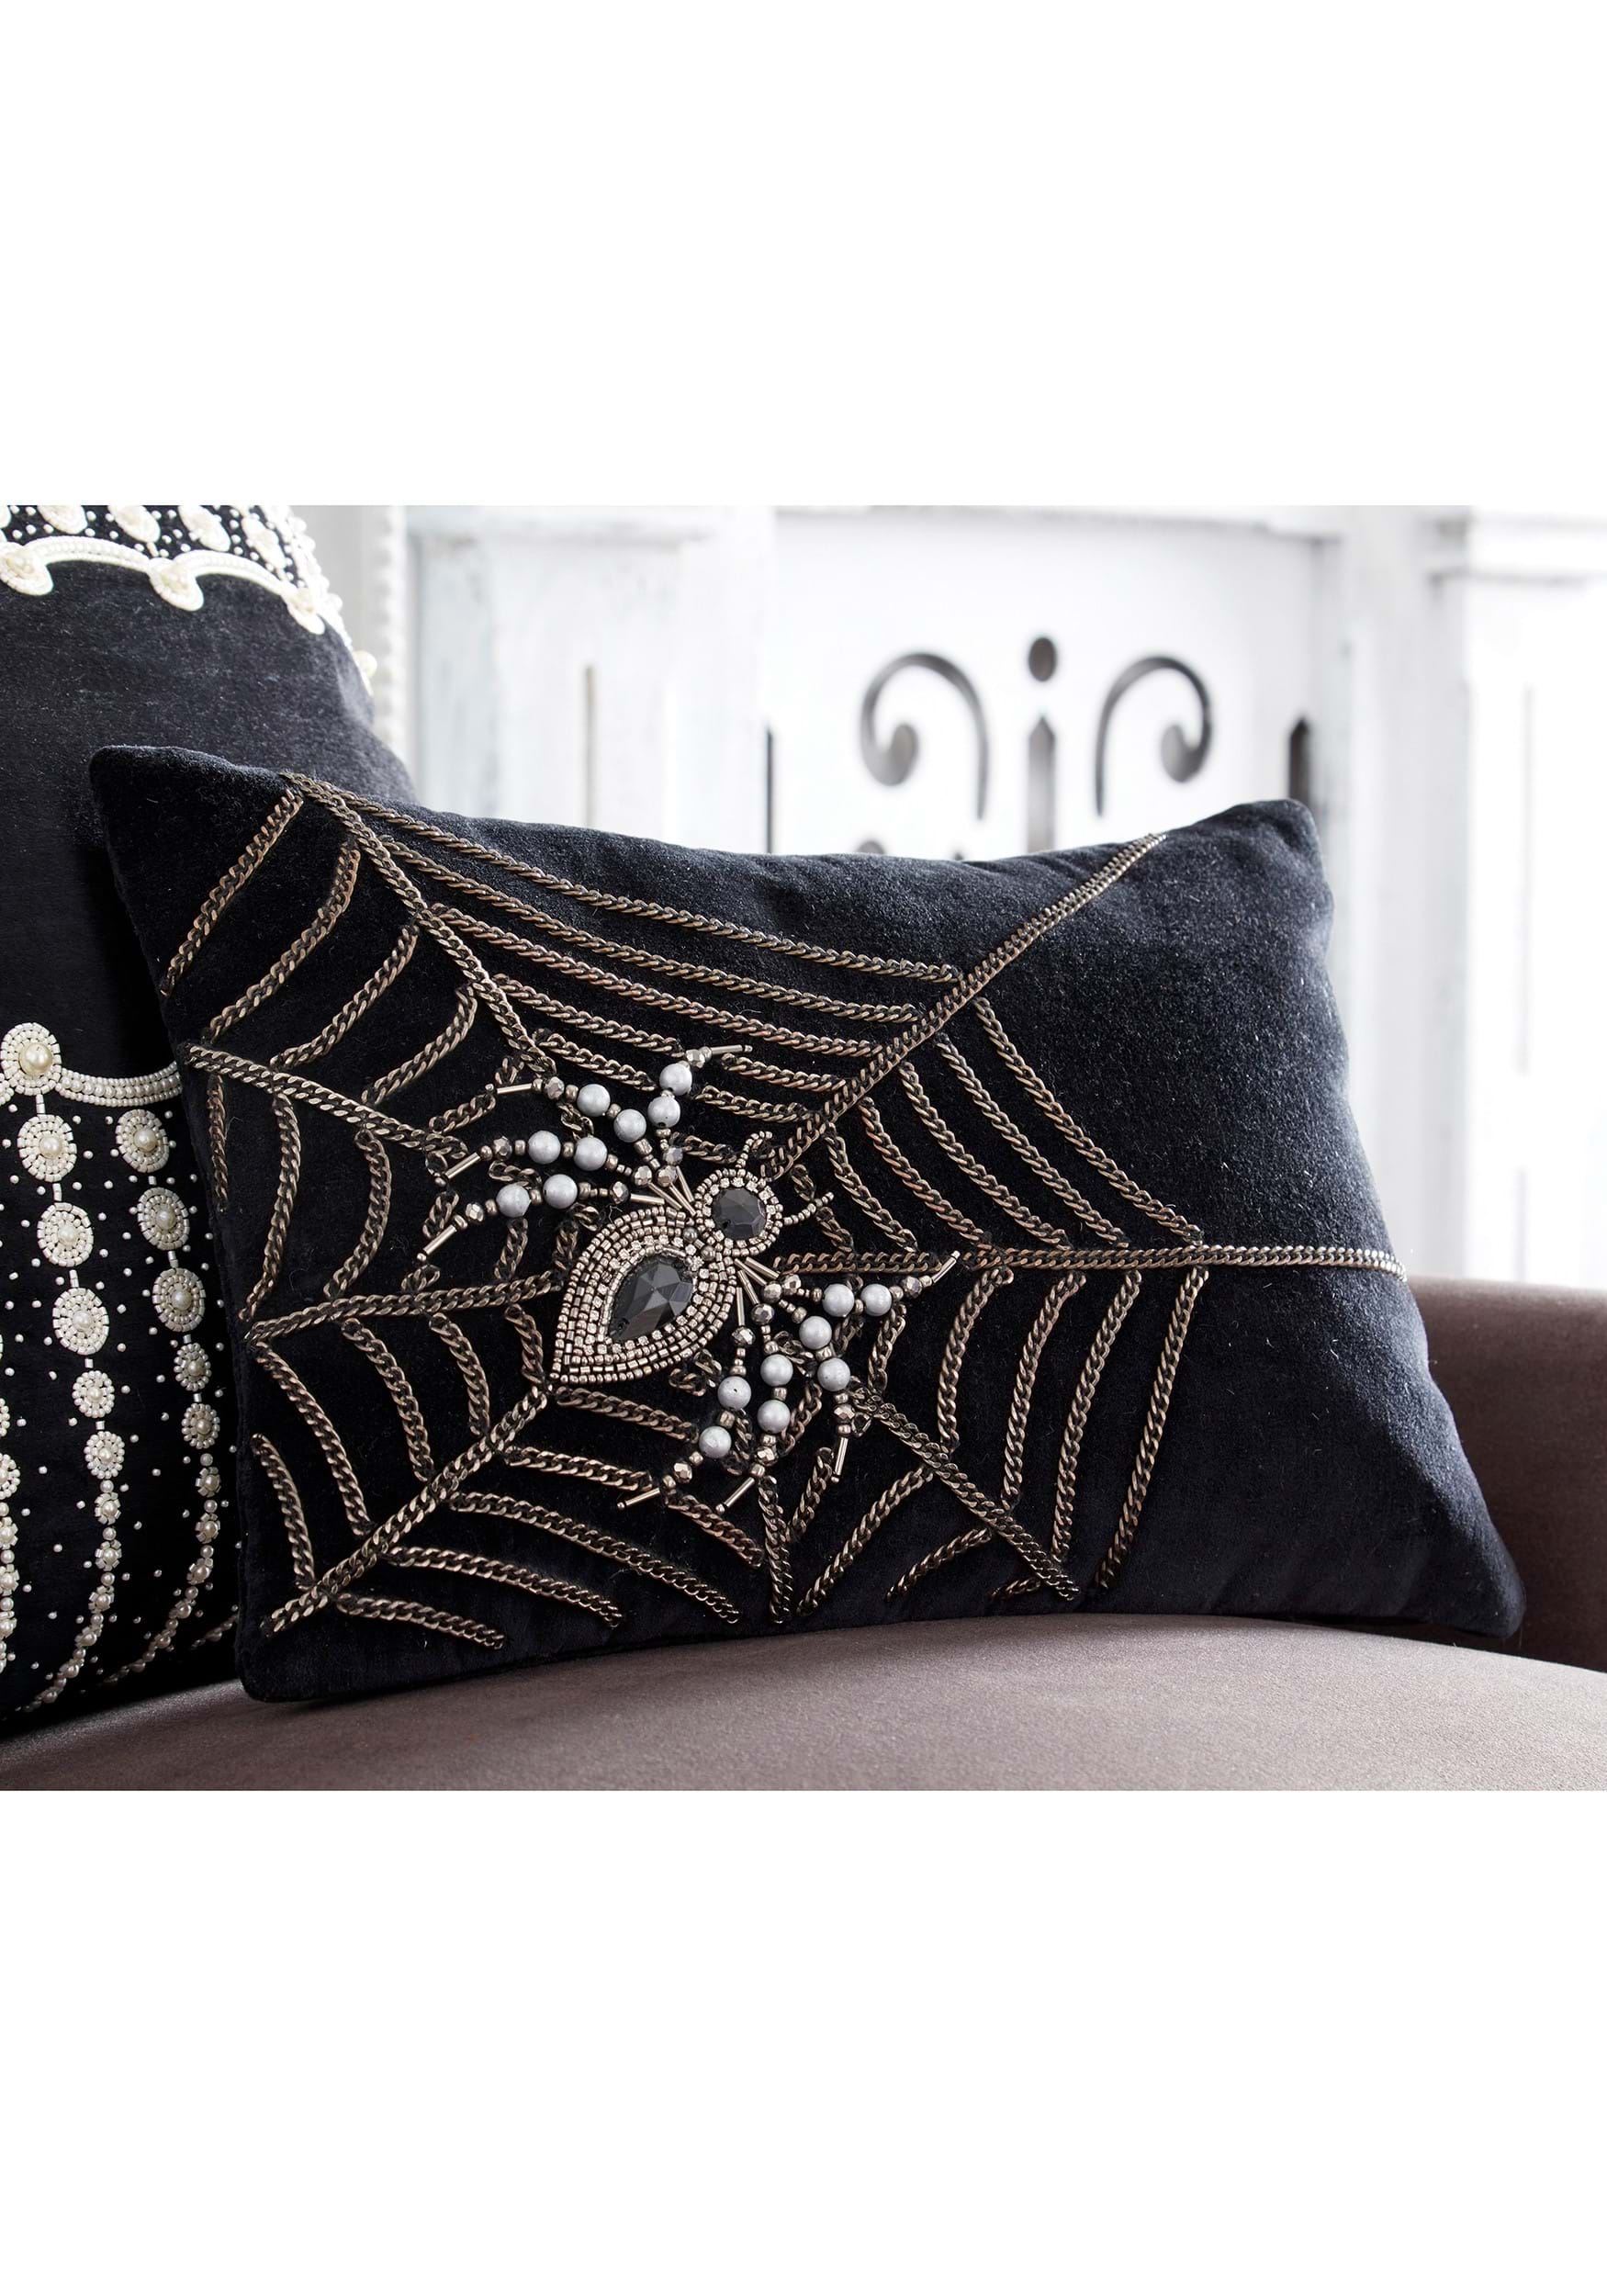 14 Black Velvet Pillow With Chain Web And Beaded Spider